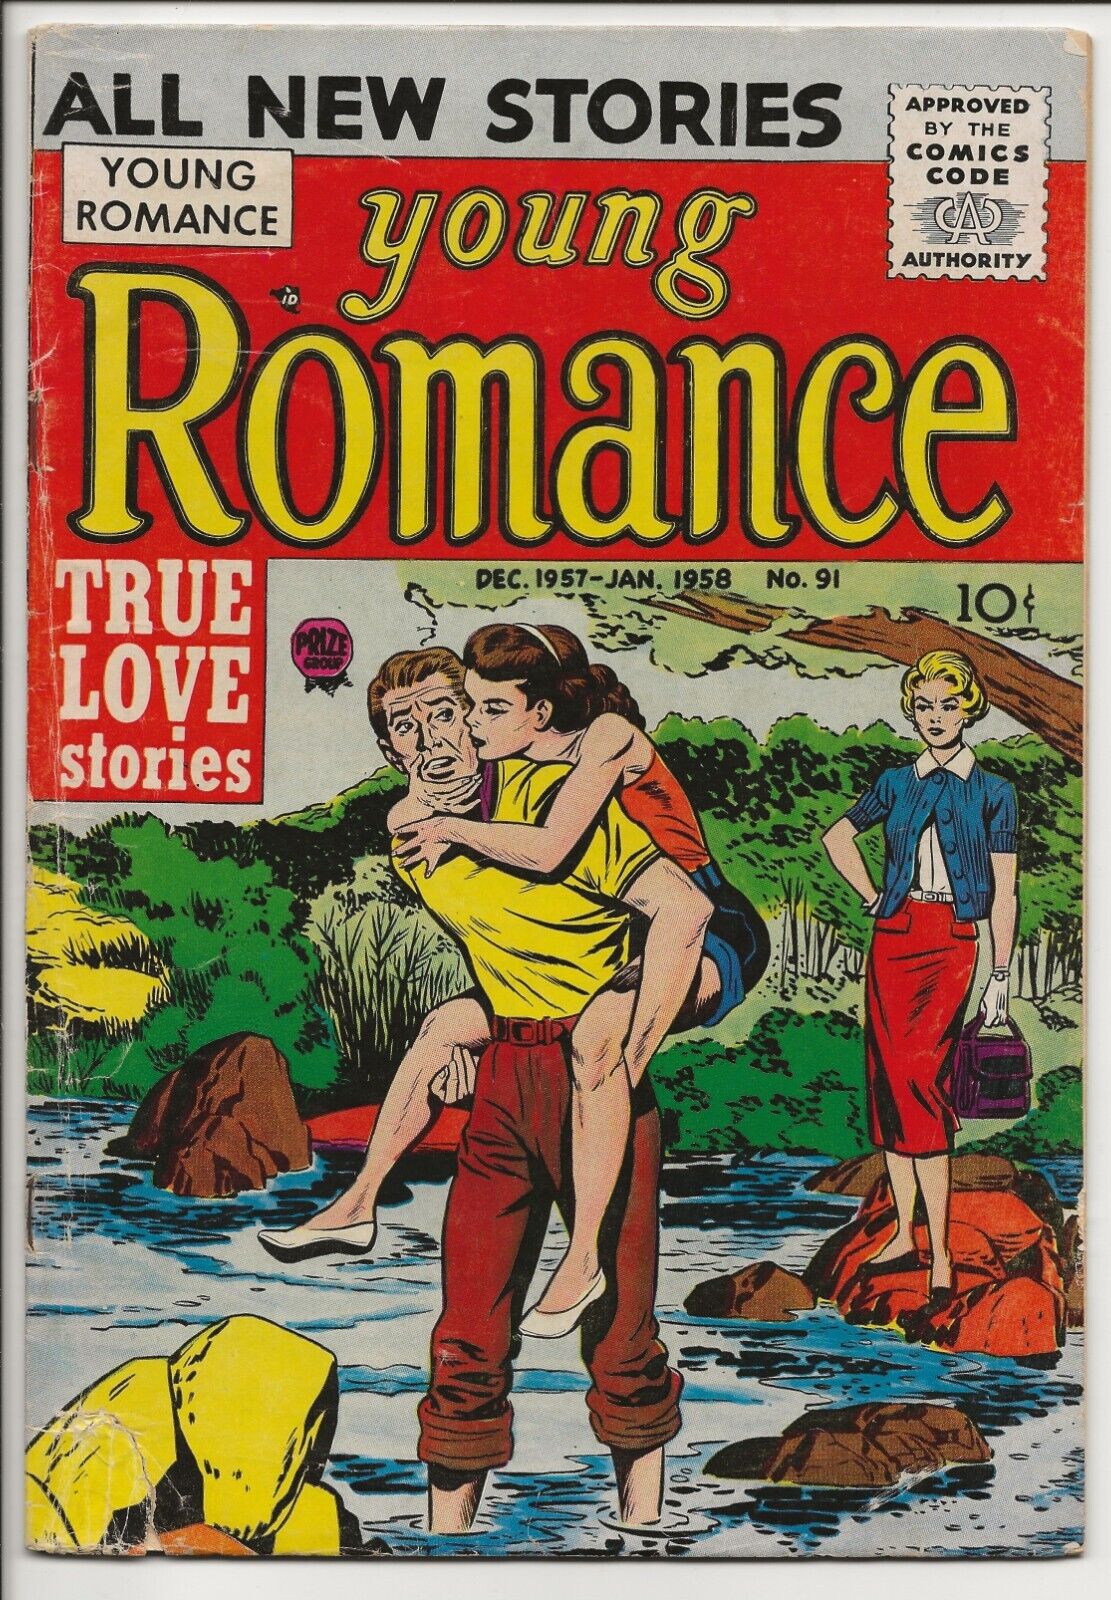 Young Romance #91 Feature Publications